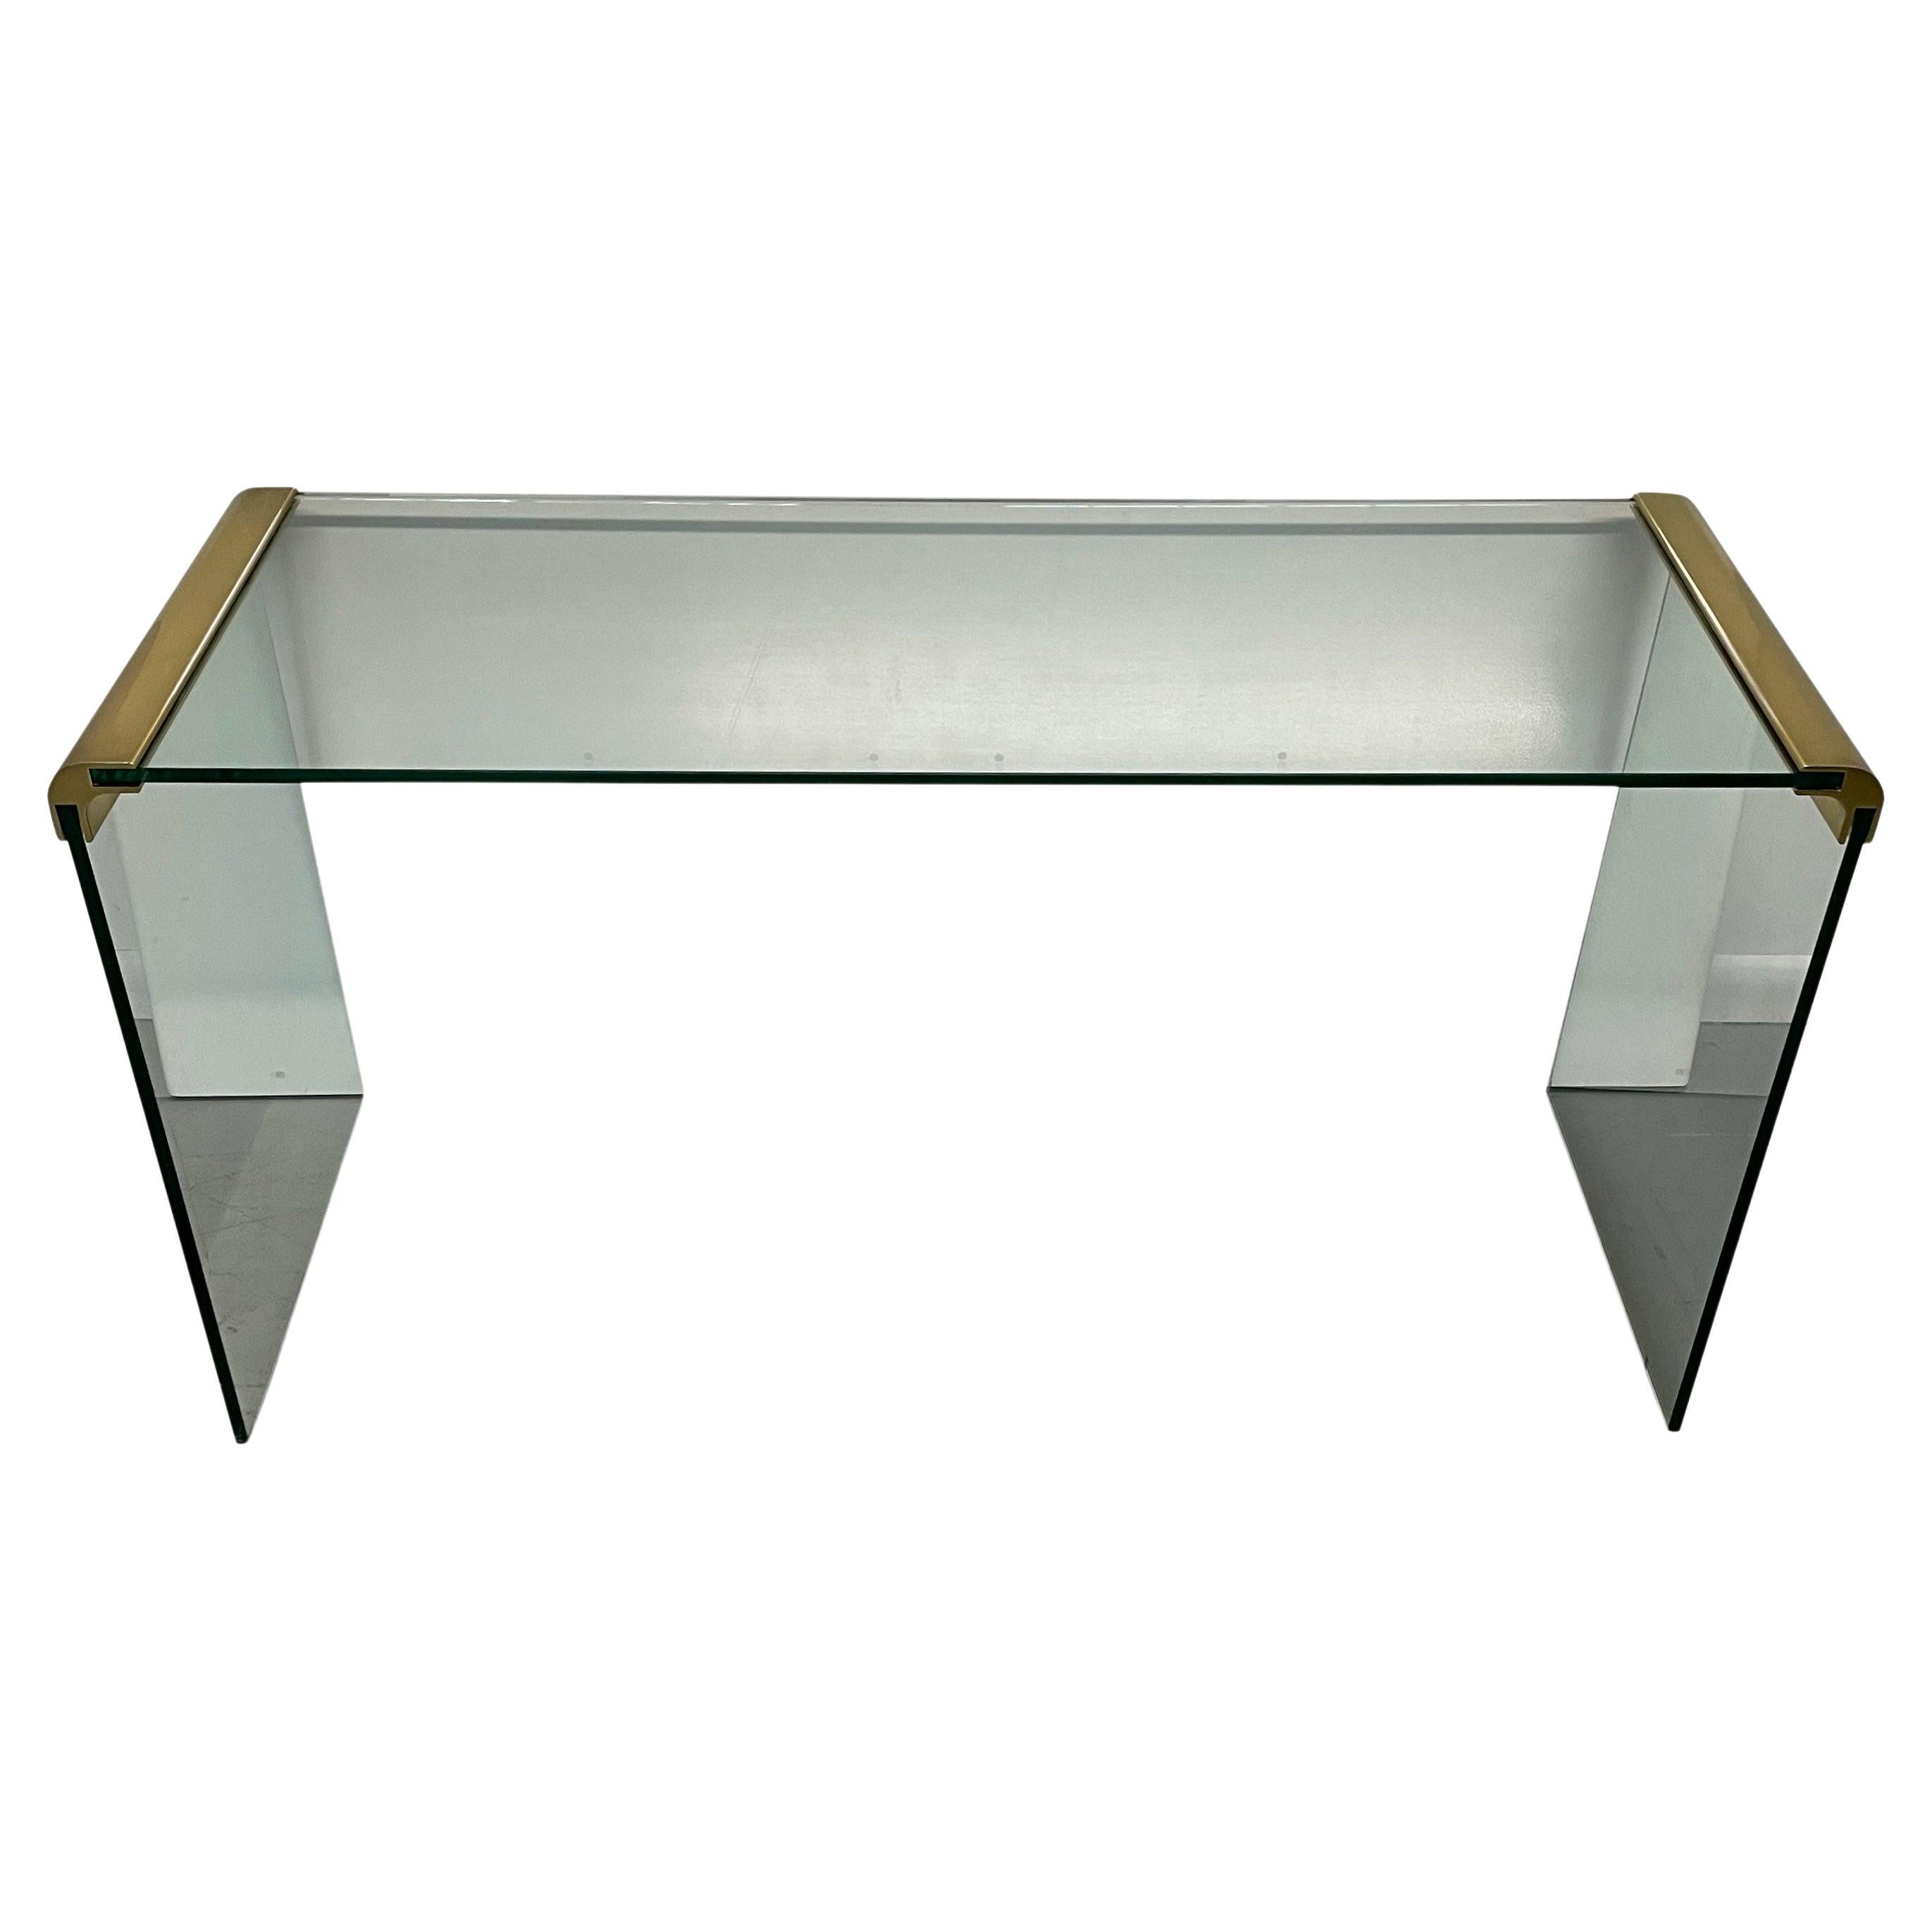 A simple and modern looking Classic designed by Leon Rosen and produced by Pace Furniture company in the 1960s. This console table features glass construction with brass bracket details. Excellent overall condition.